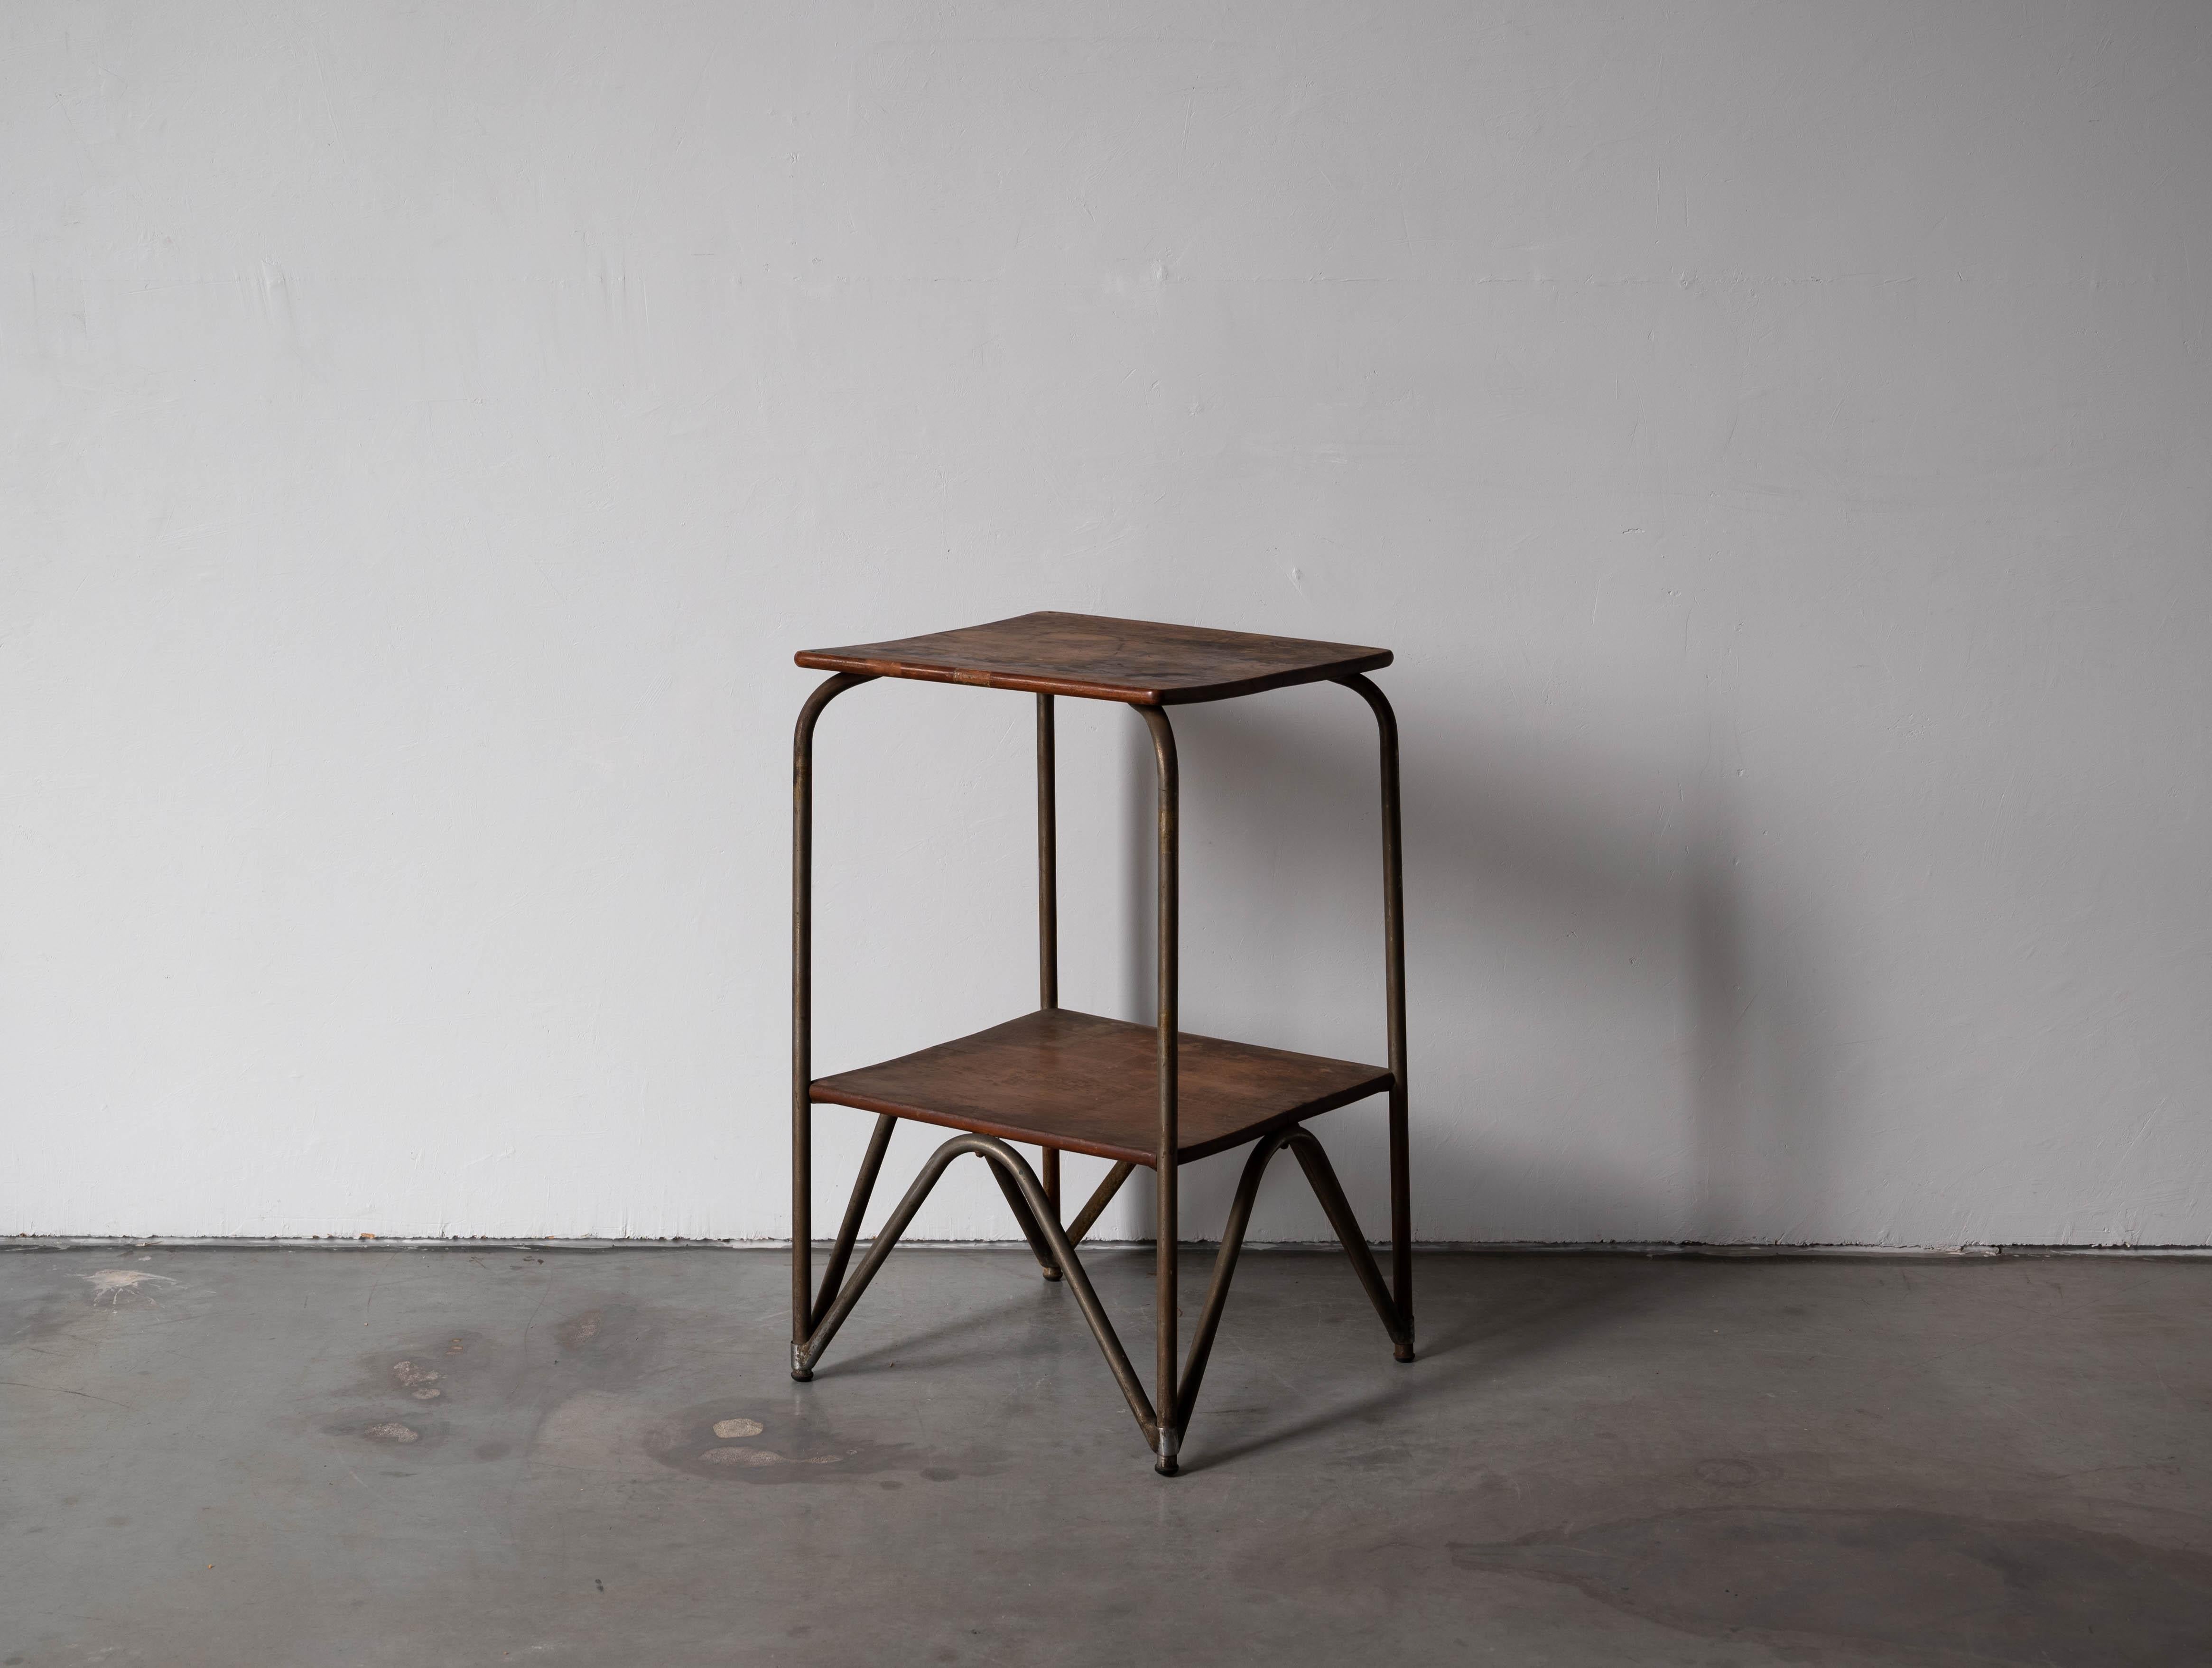 A walnut and iron side table / or end table produced in Italy, 1930s.

